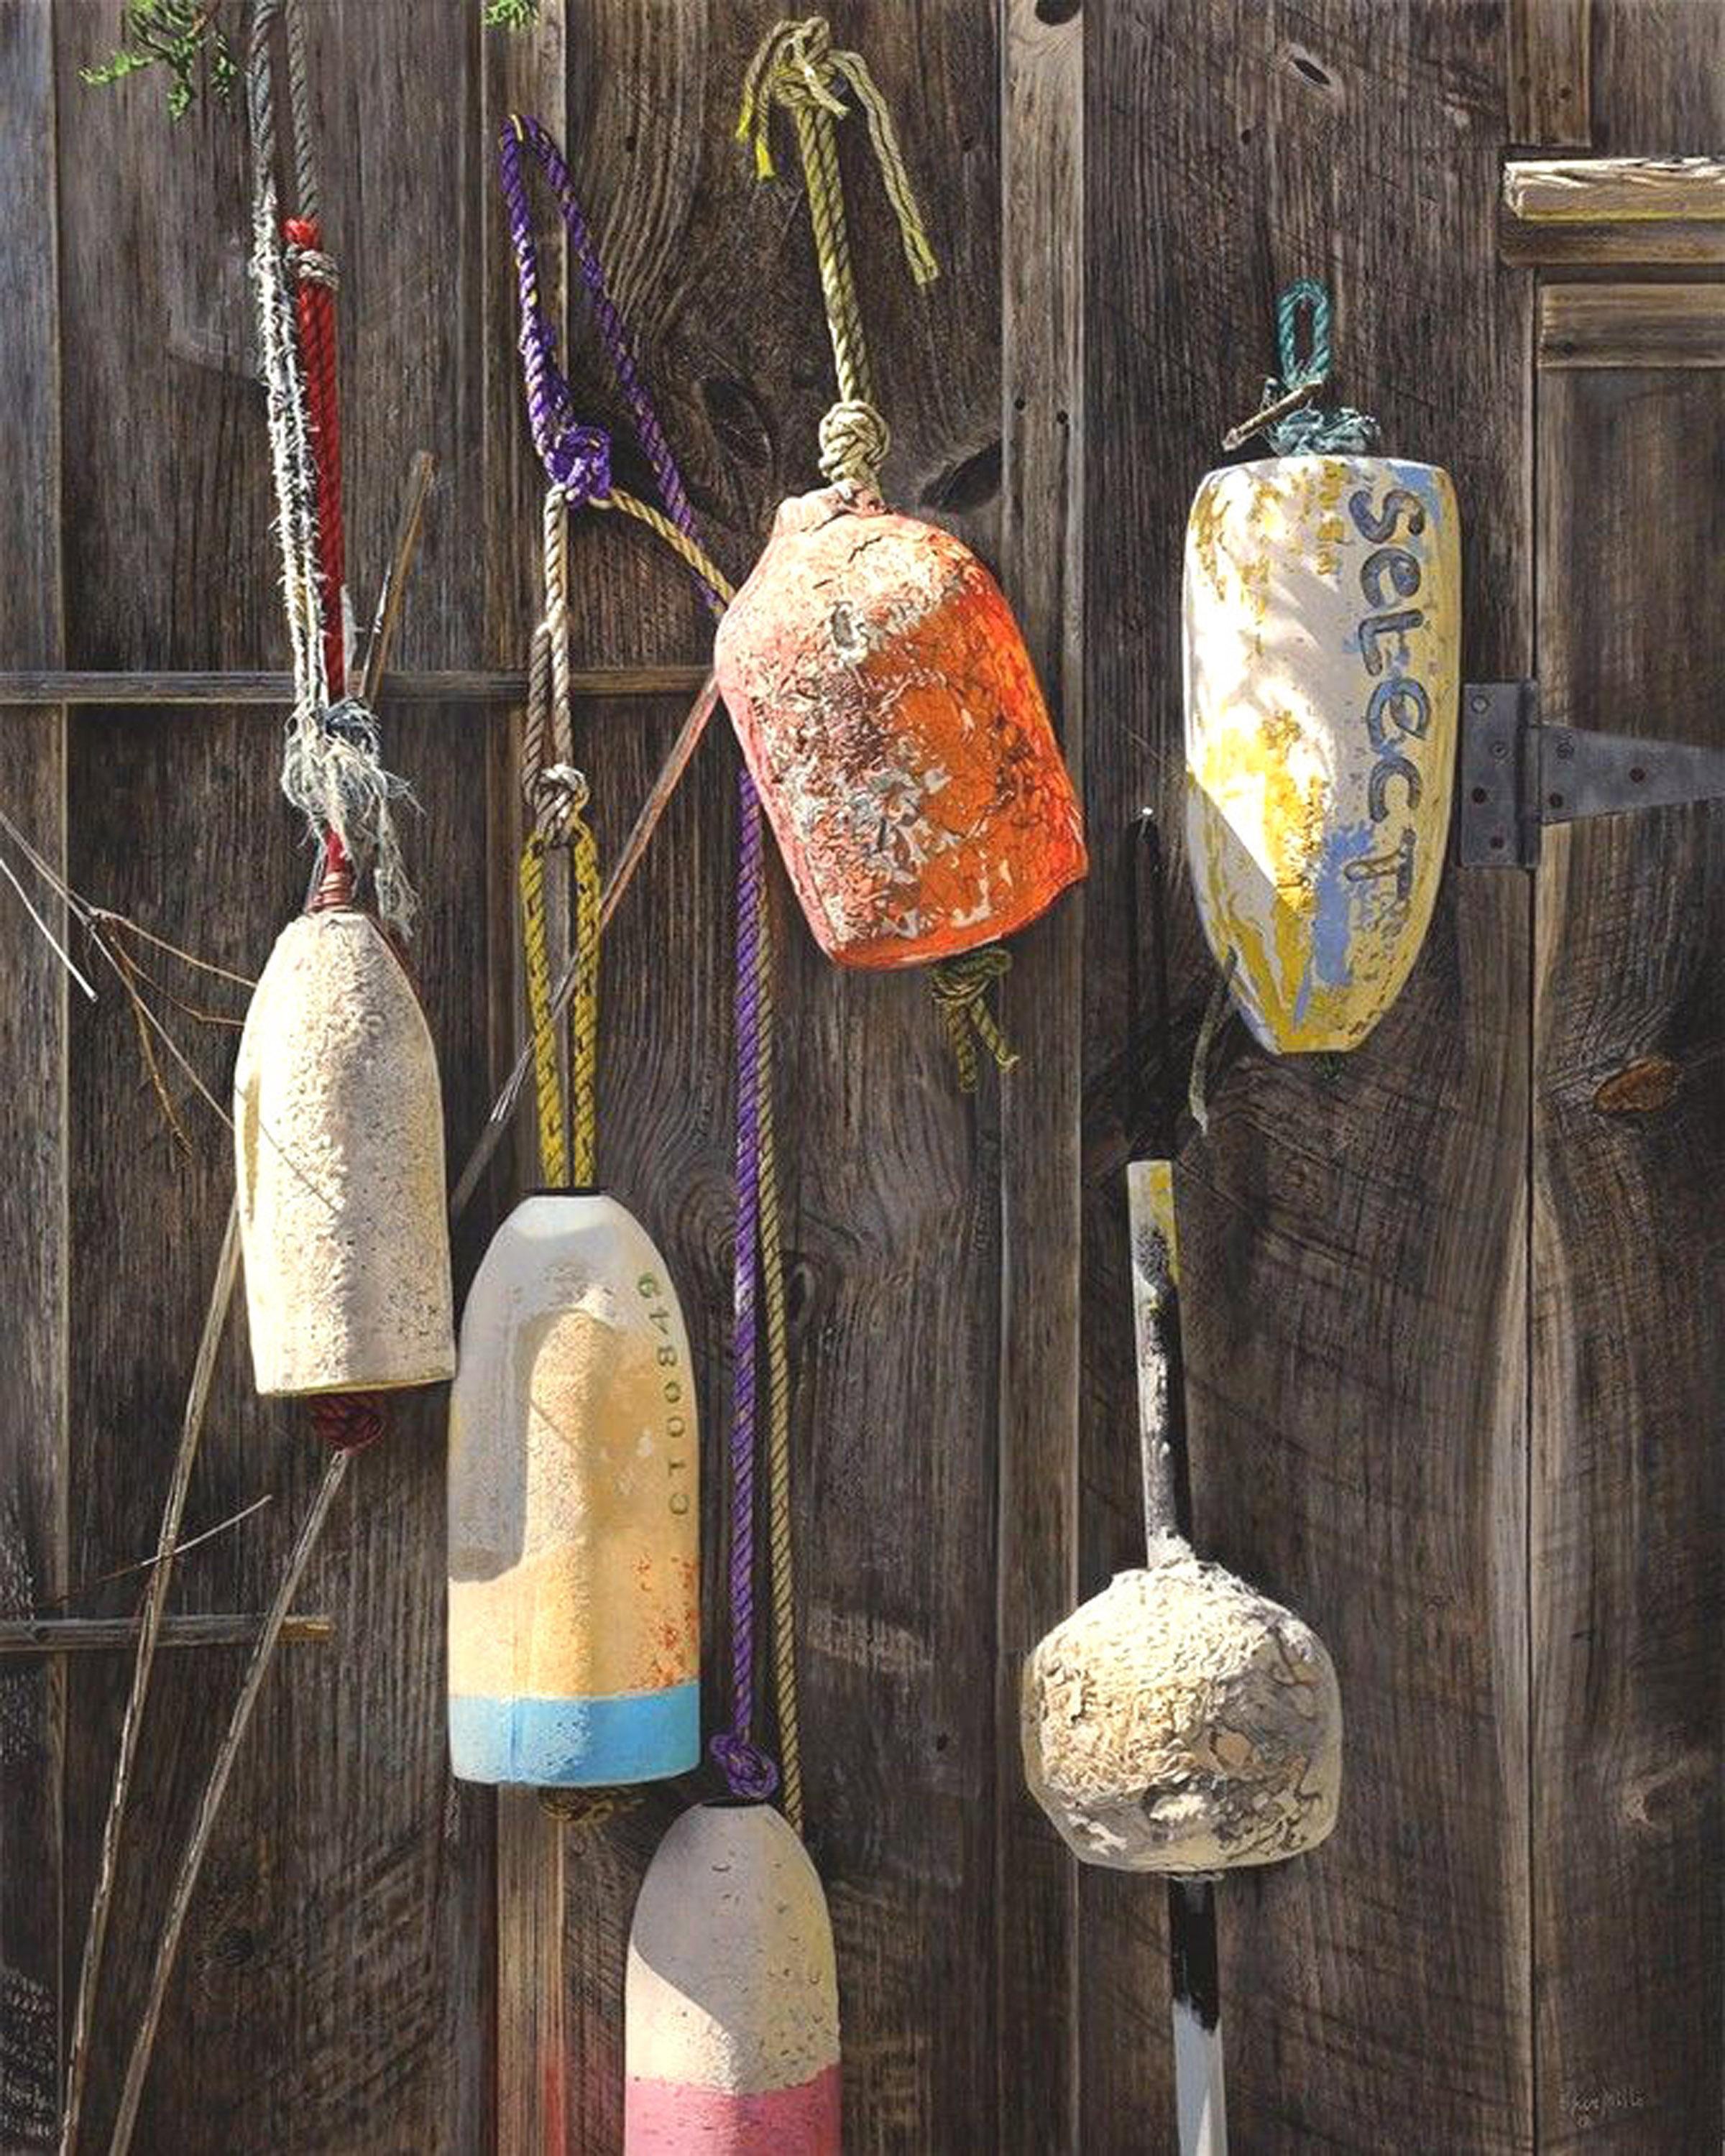 Steve Mills Still-Life Painting - RETIRED - Contemporary Realism / Photorealism / Beach House / Sailing / Buoys